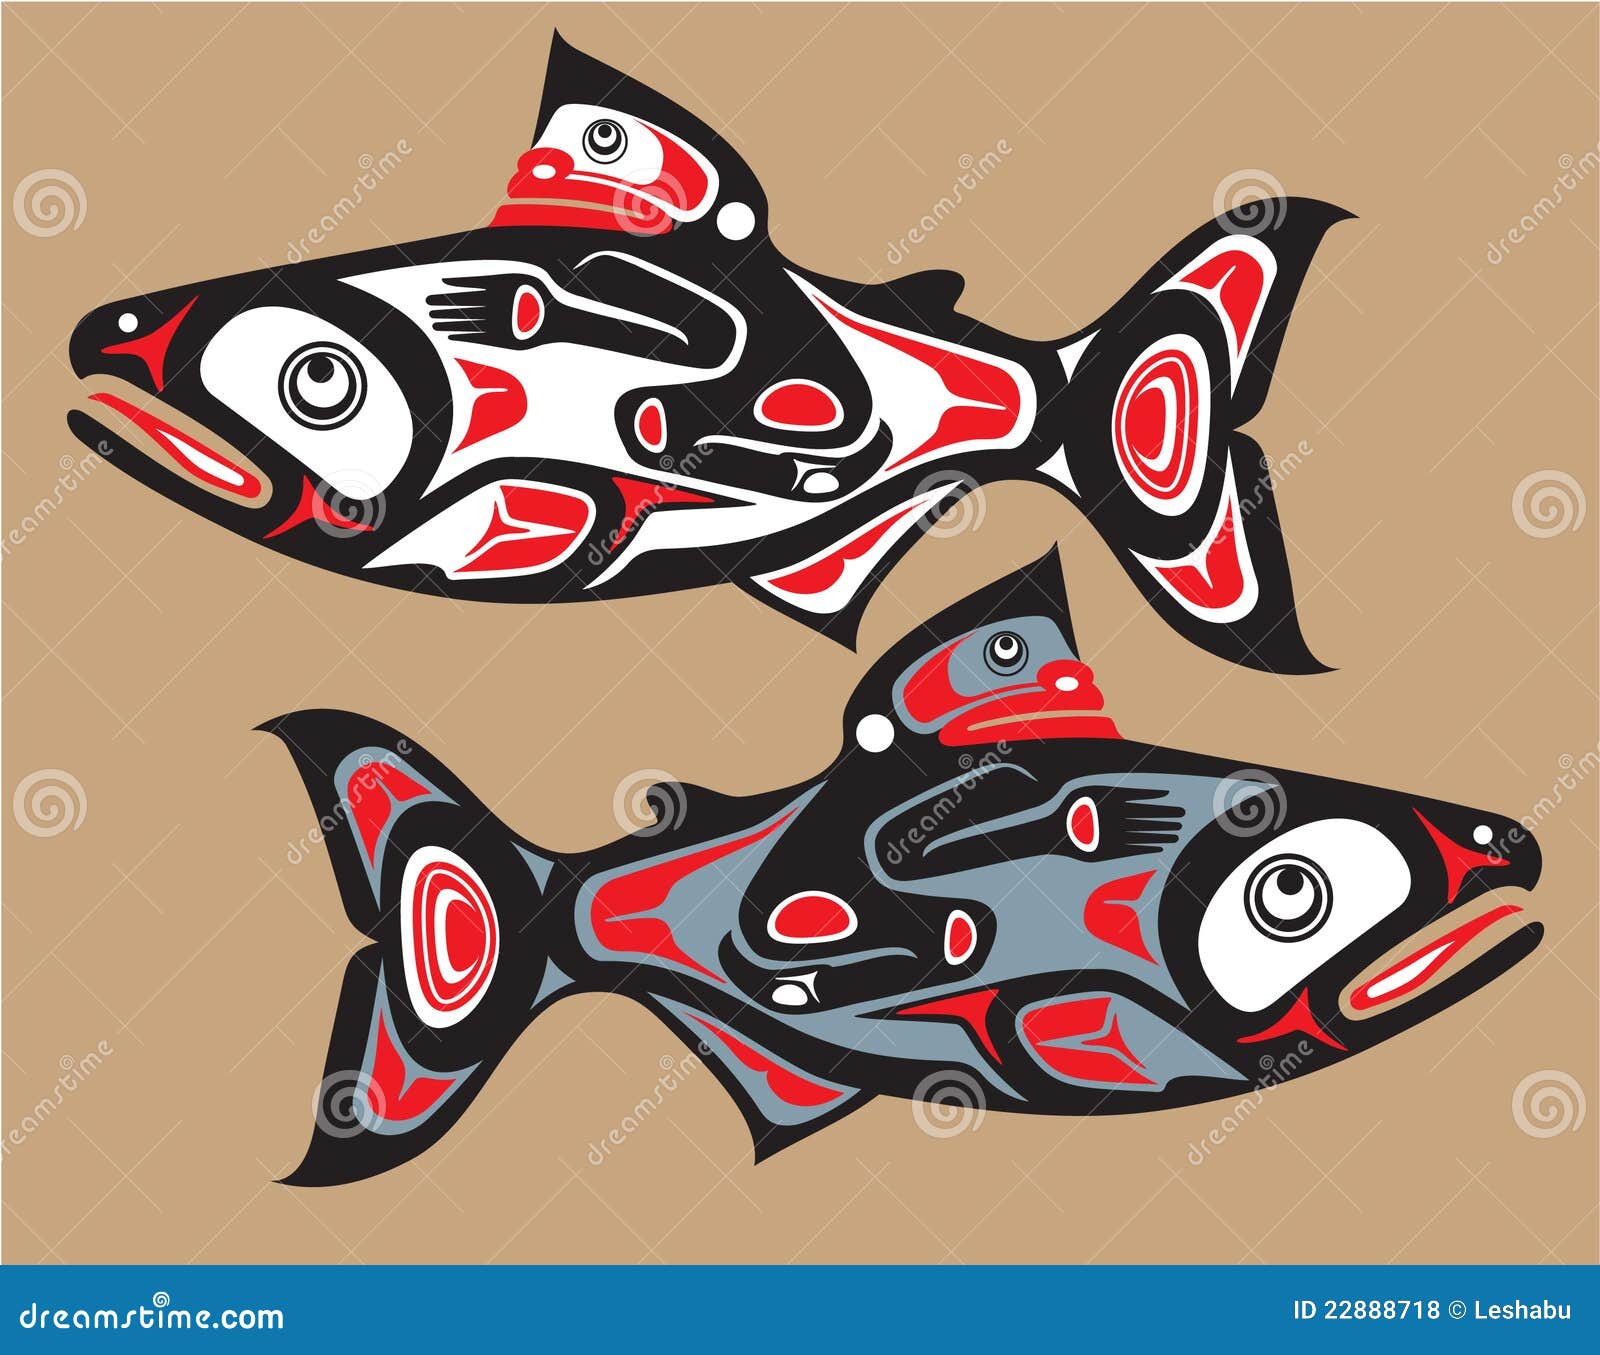 How to Draw a Salmon Fish  Tribal Tattoo Design Style  YouTube